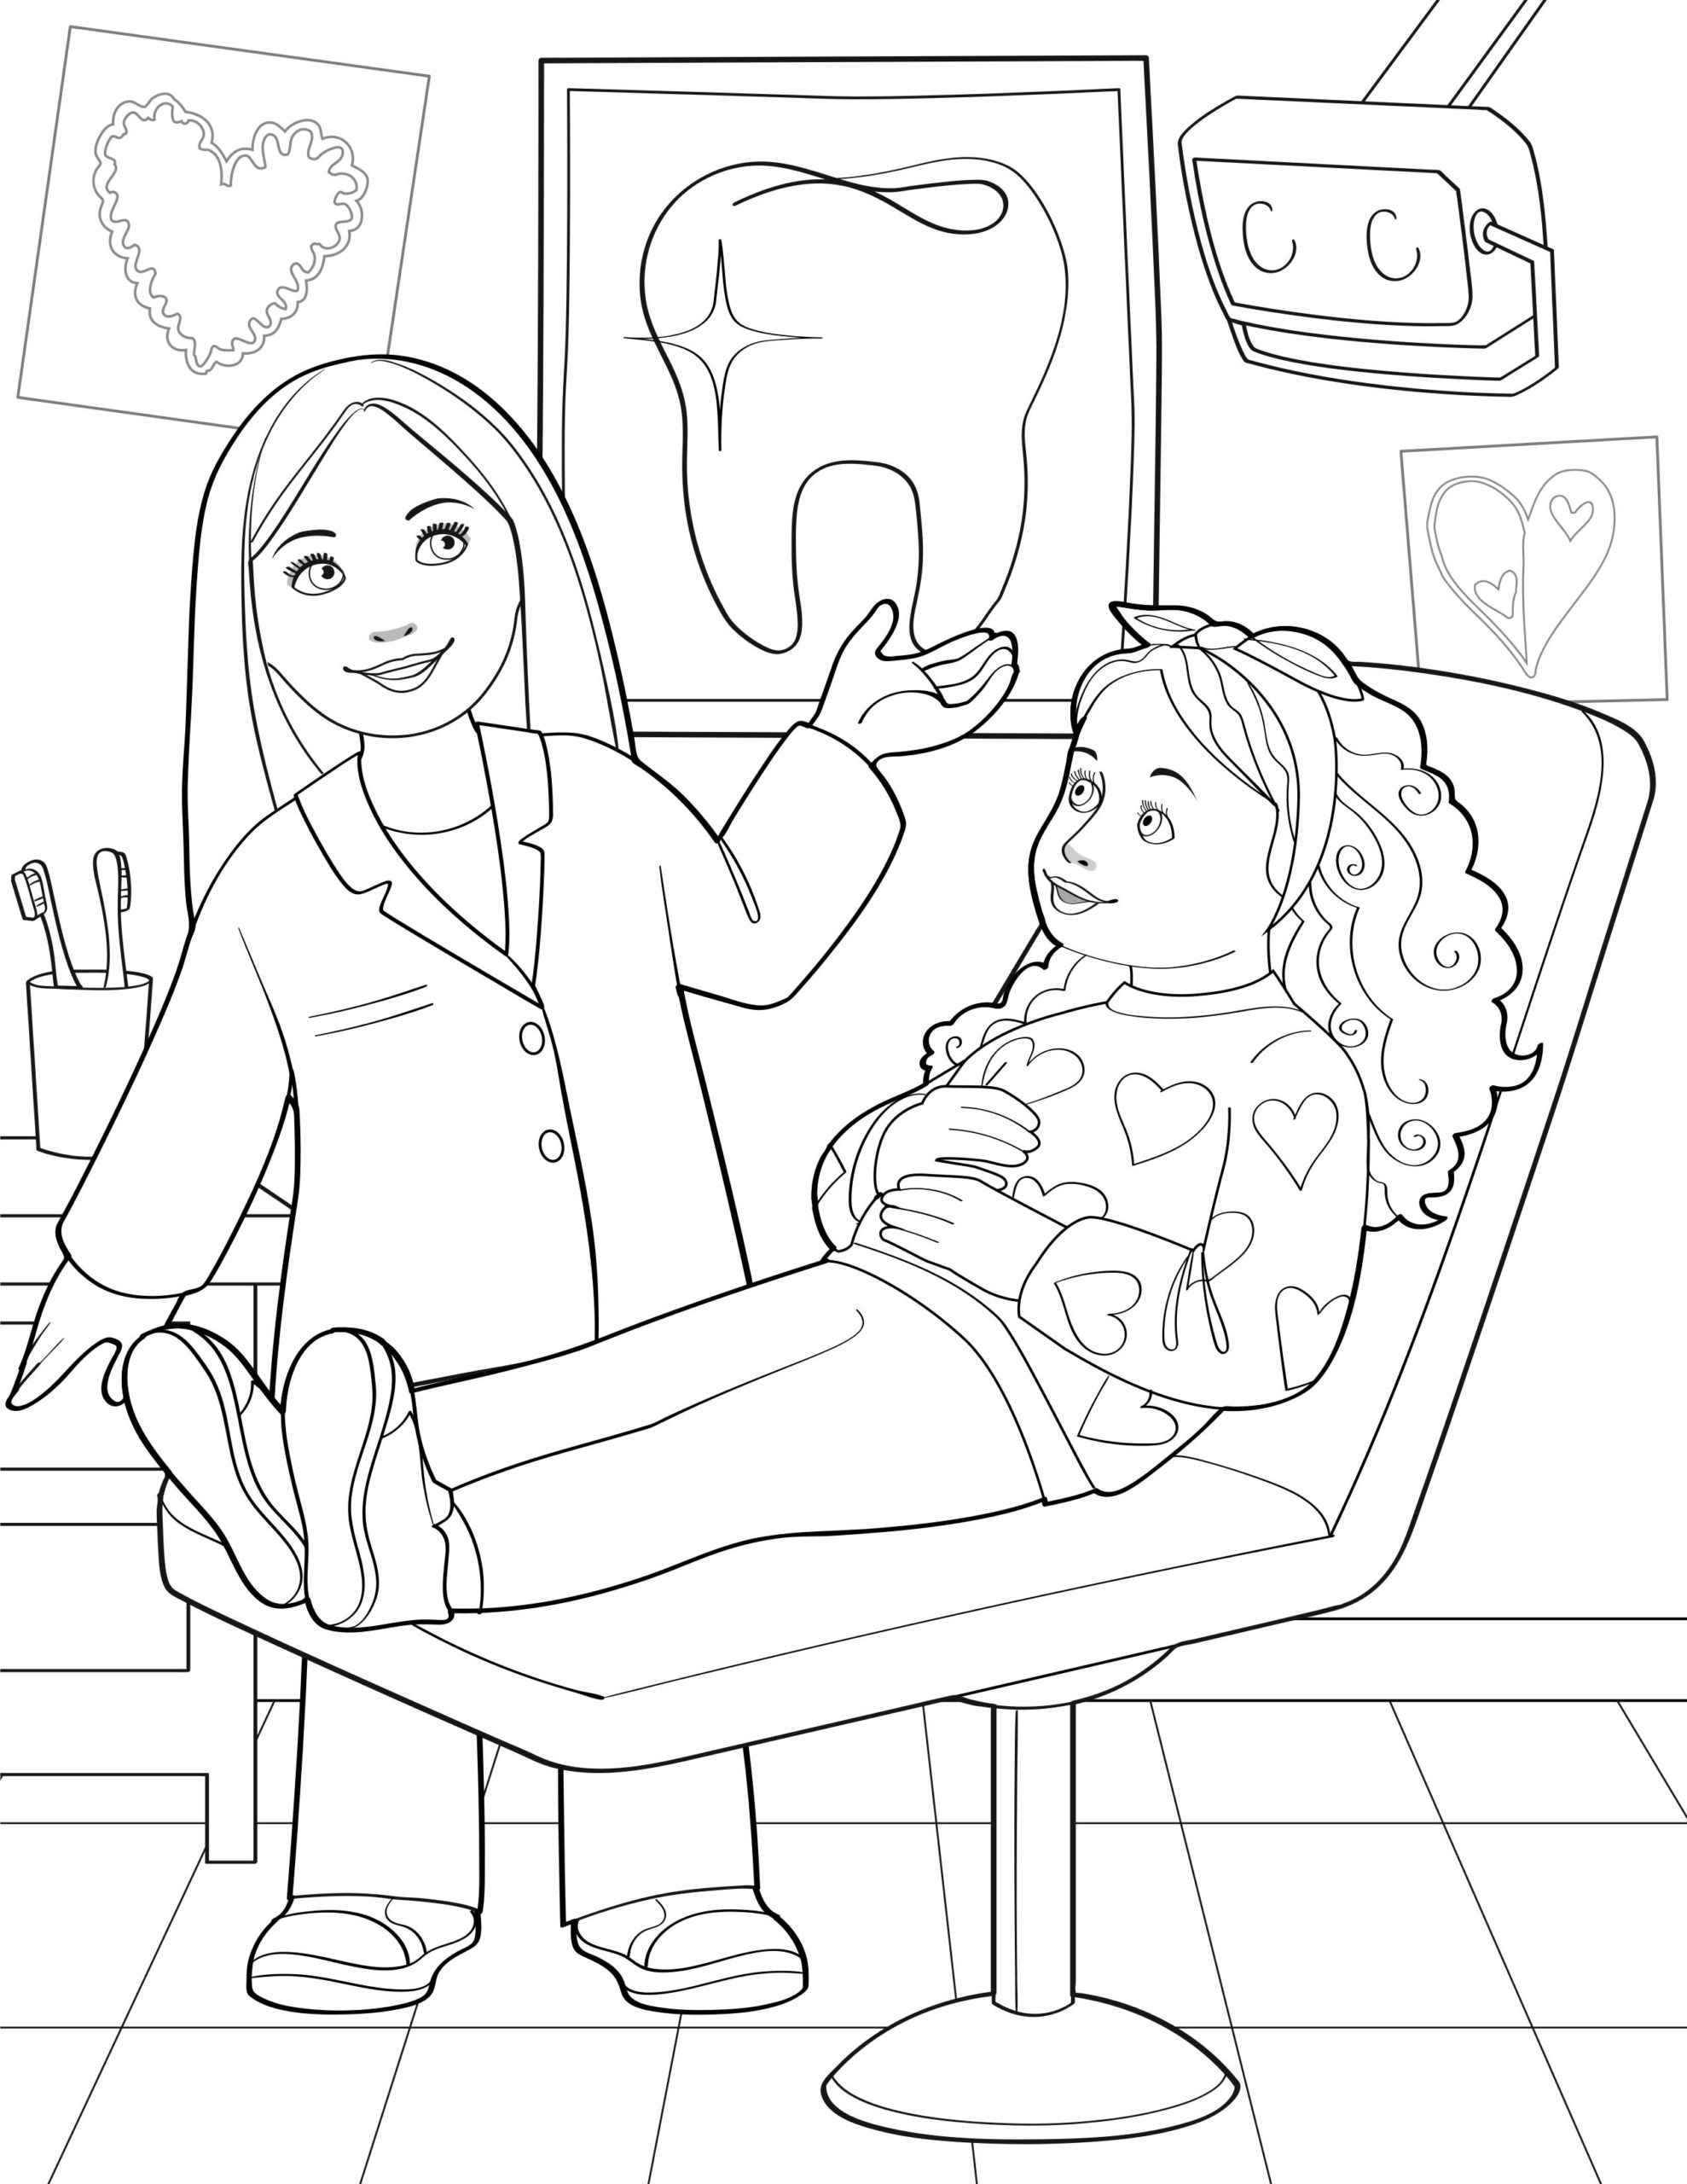 Dolls Coloring Pages for Kids, Girls, Boys, Teens Birthday School Activity